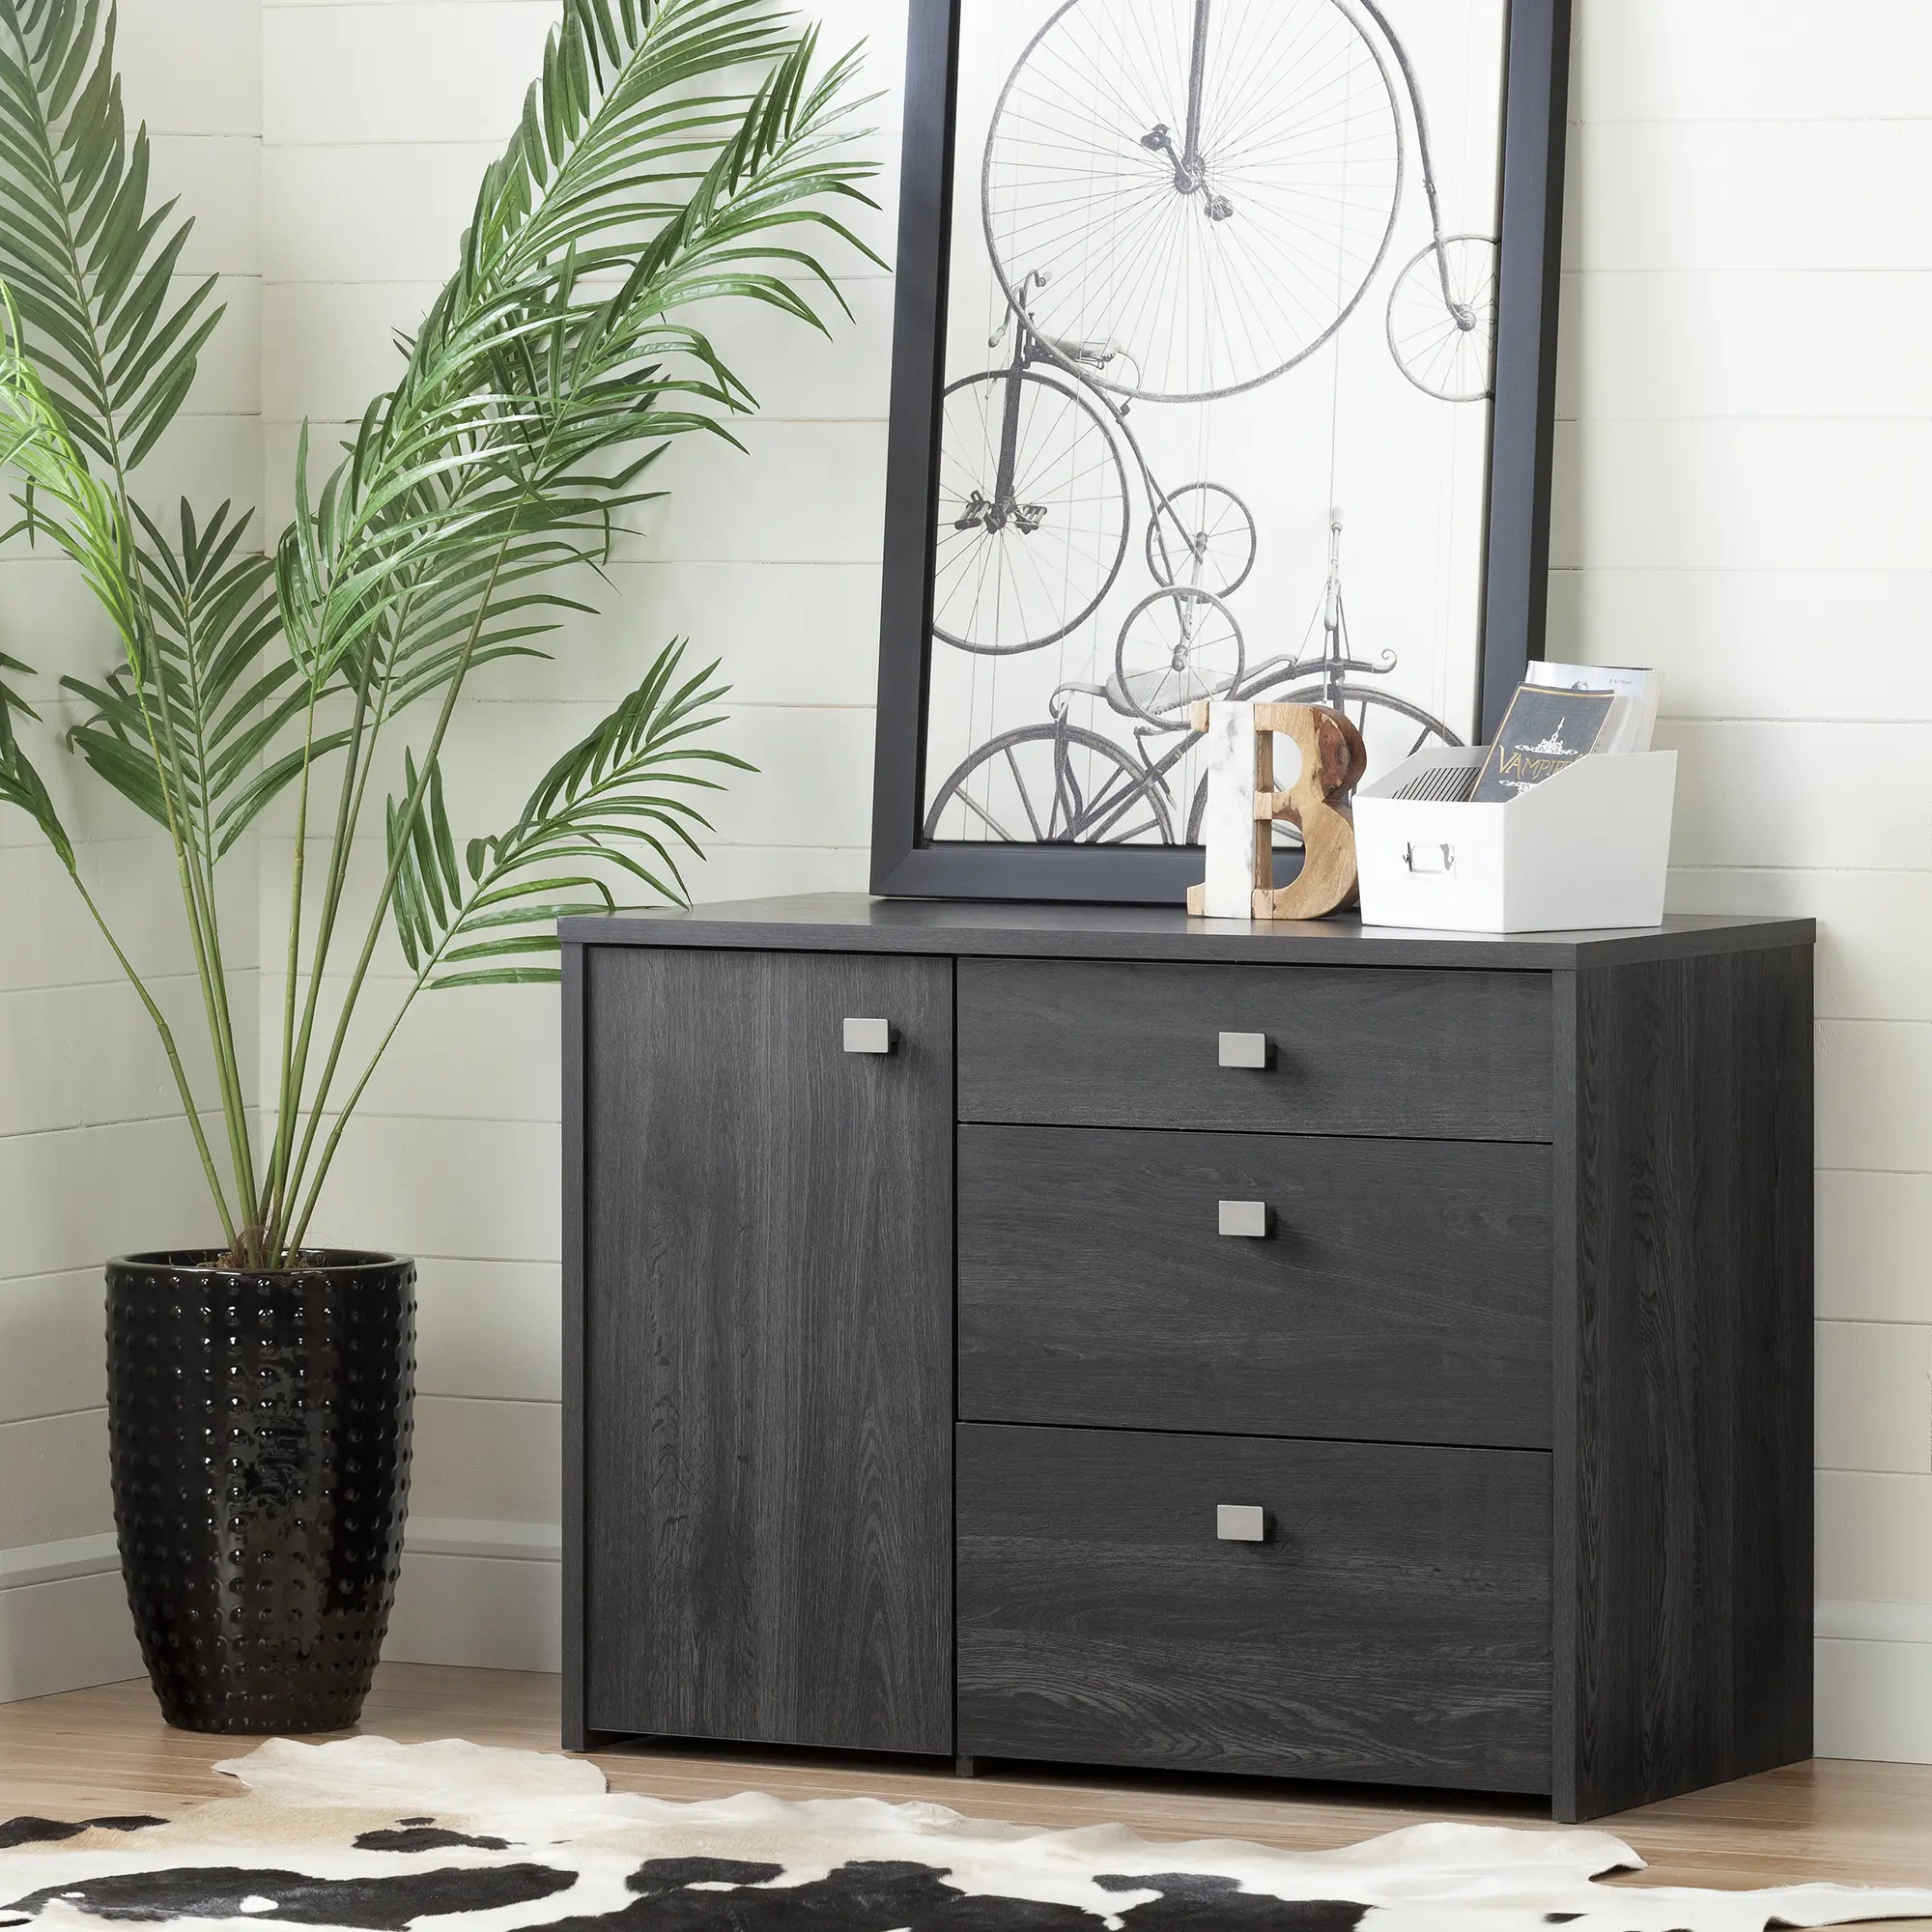 Interface Gray Oak Storage Unit with File Drawer - South Shore